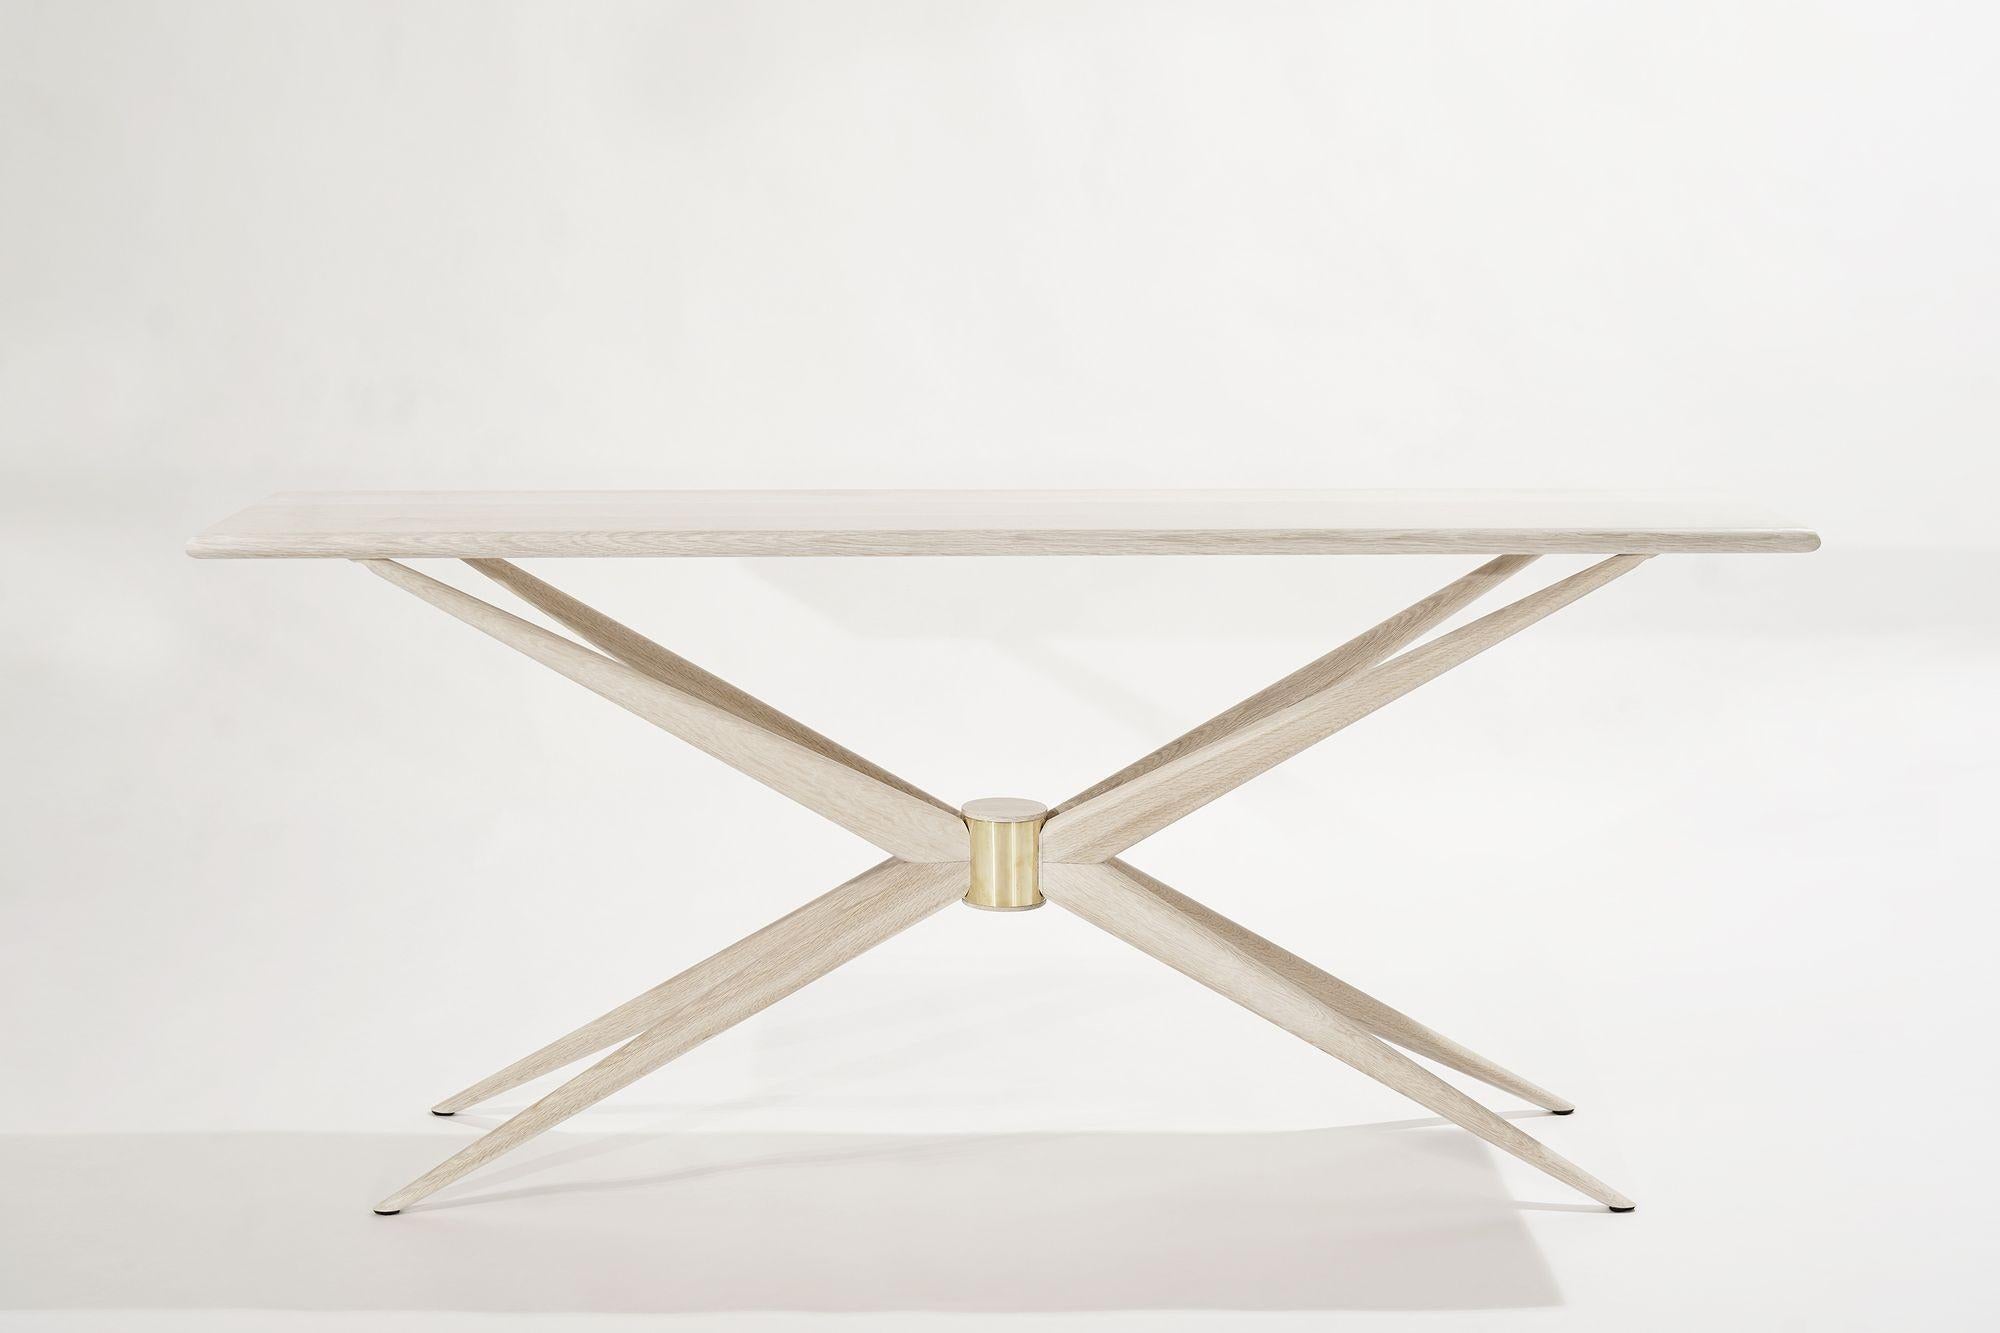 Danish design blends simple aesthetics with lively shapes. The Sputnik Console is inspired by Hans Wegner, and it evokes different energy from every angle. Star-shaped legs appear delicate and uplifting from the side. Head-on, the central brass